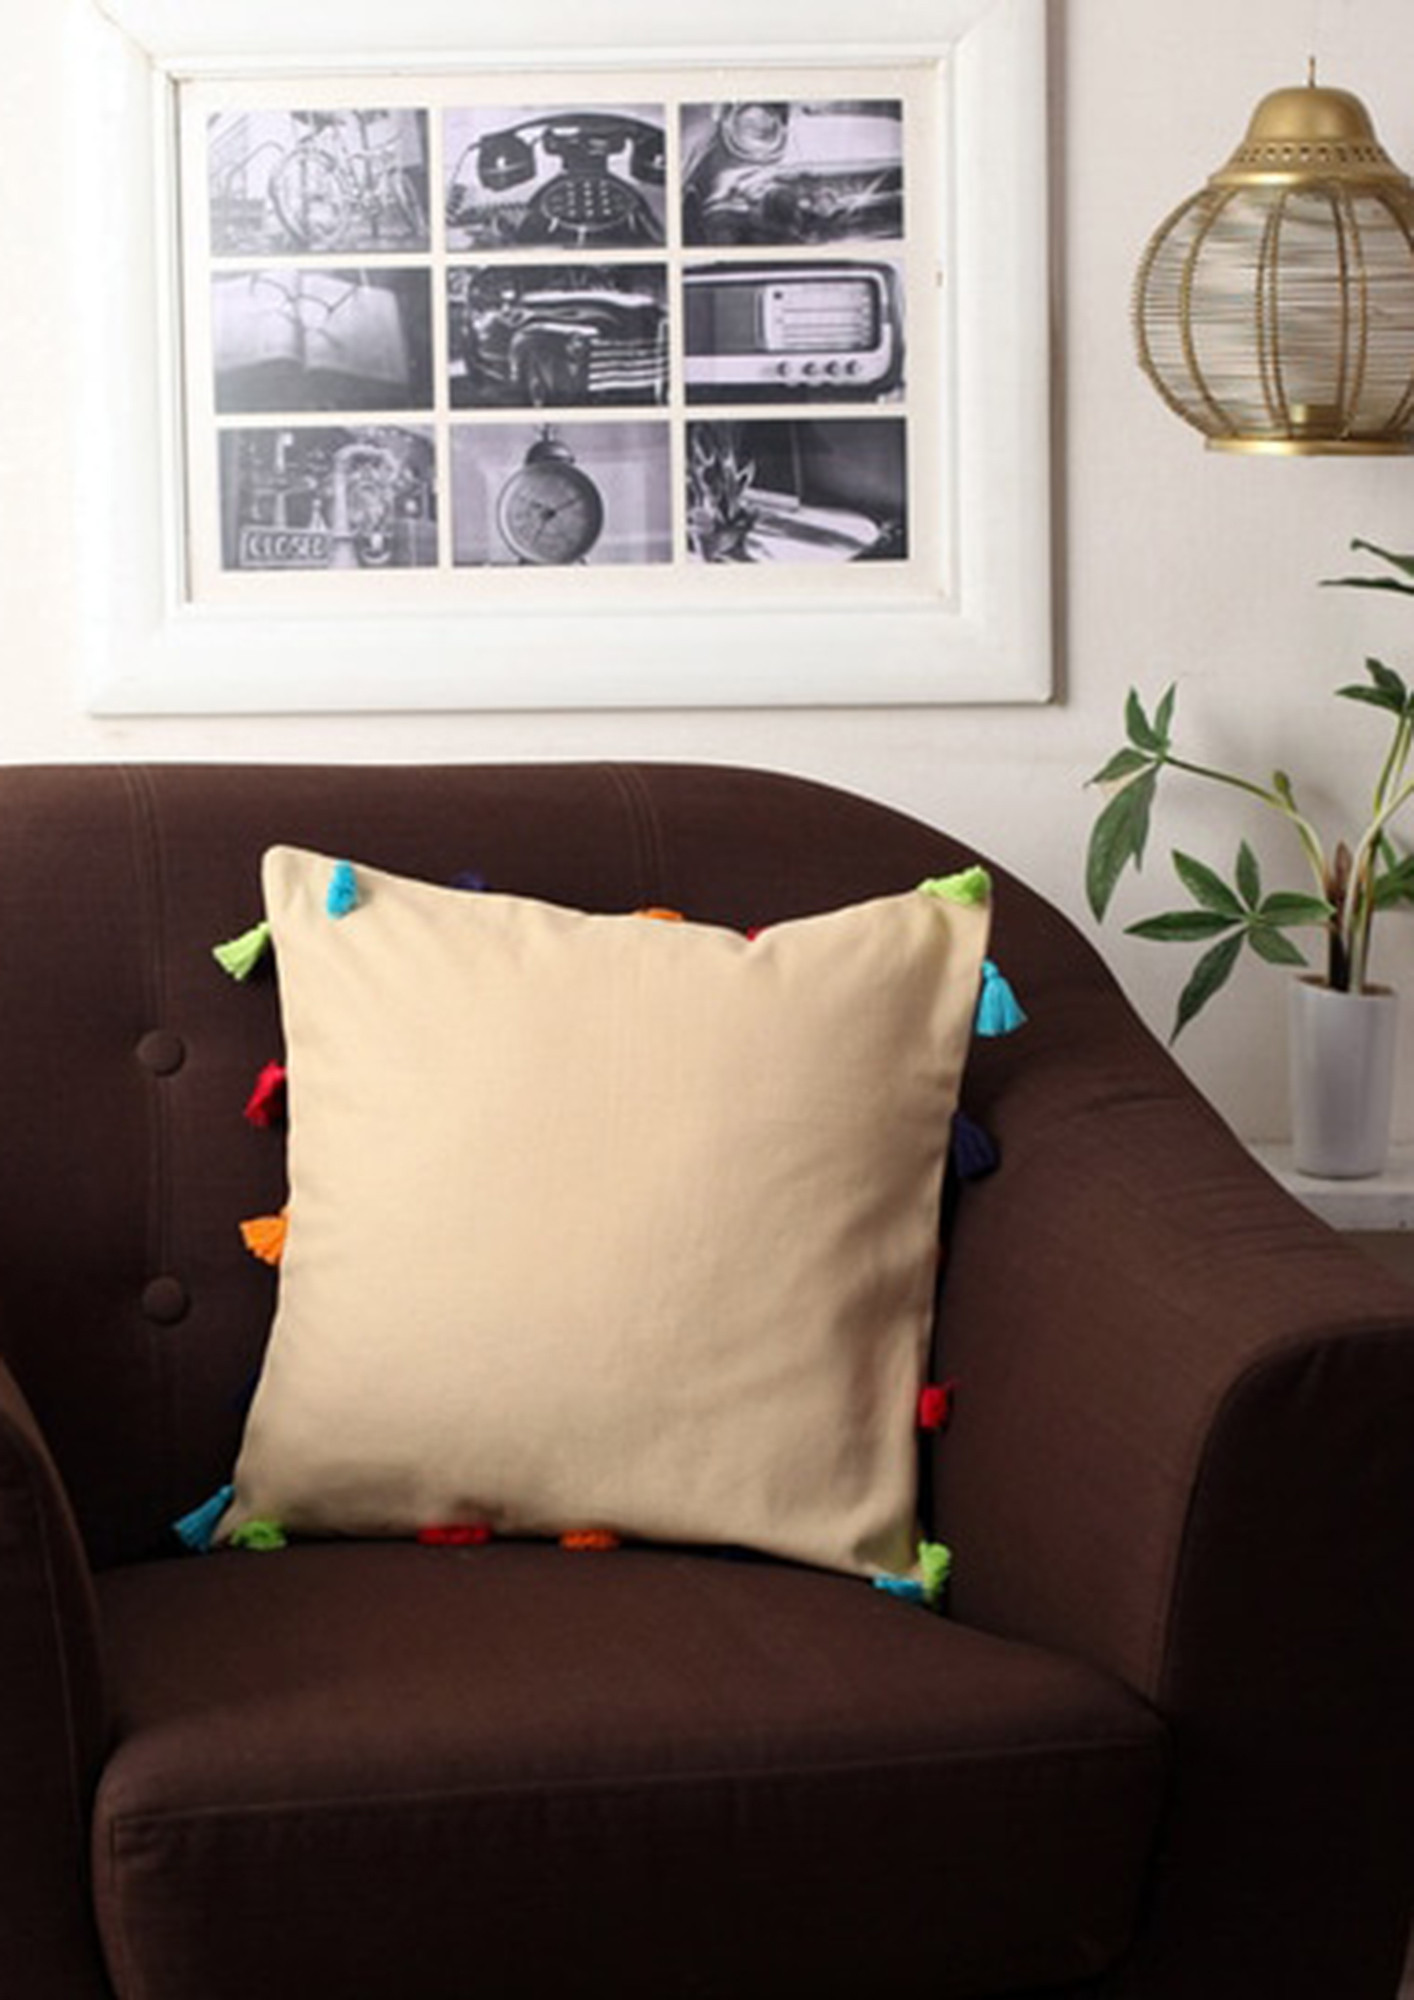 Lushomes YellowSofa Cushion Cover Online with Colorful Tassels (Pack of 1 Pc, 24 x 24 inches)